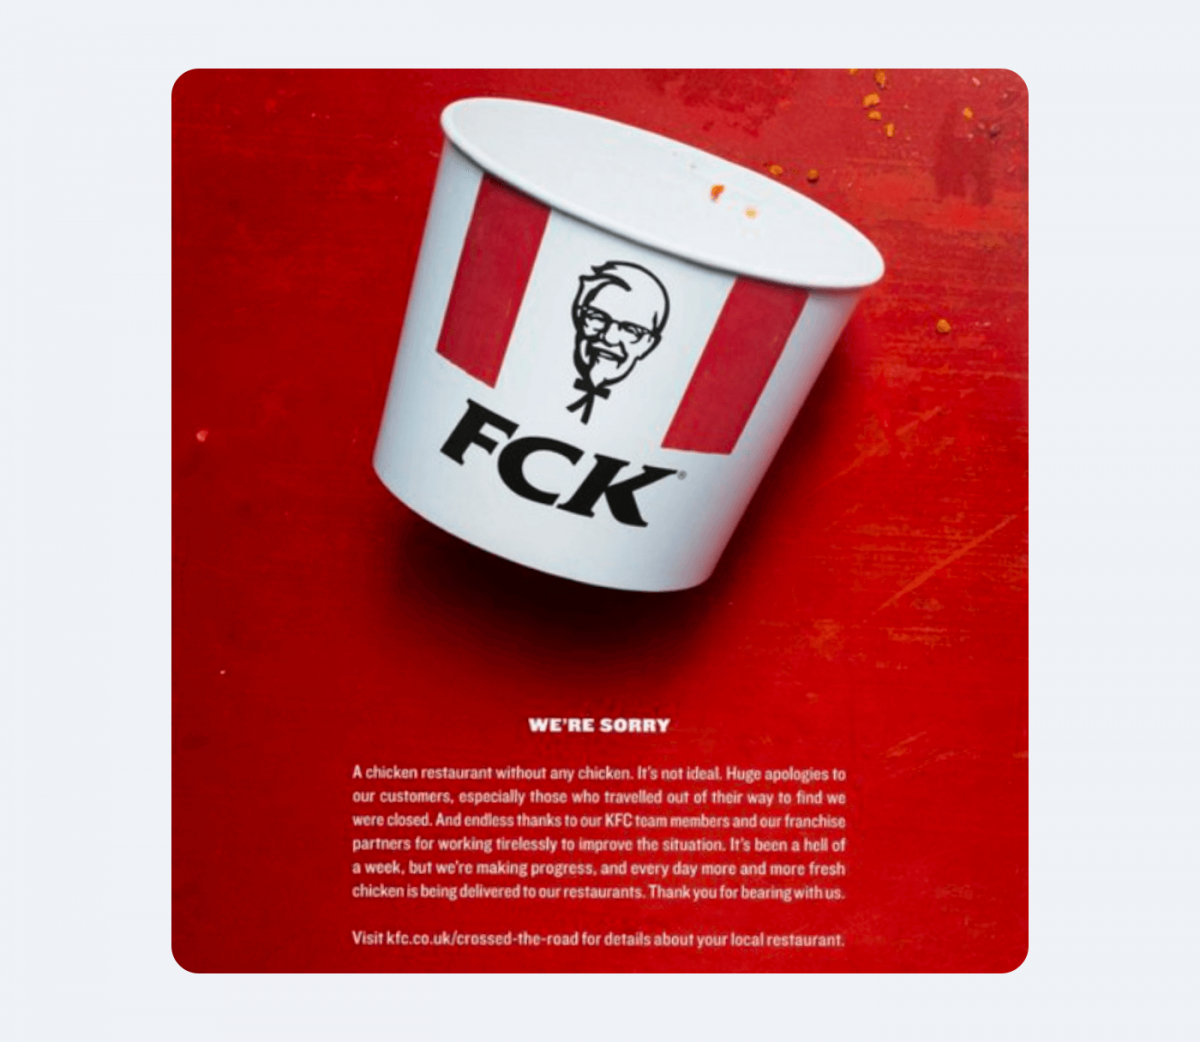 An example of a relationship marketing campaign by KFC